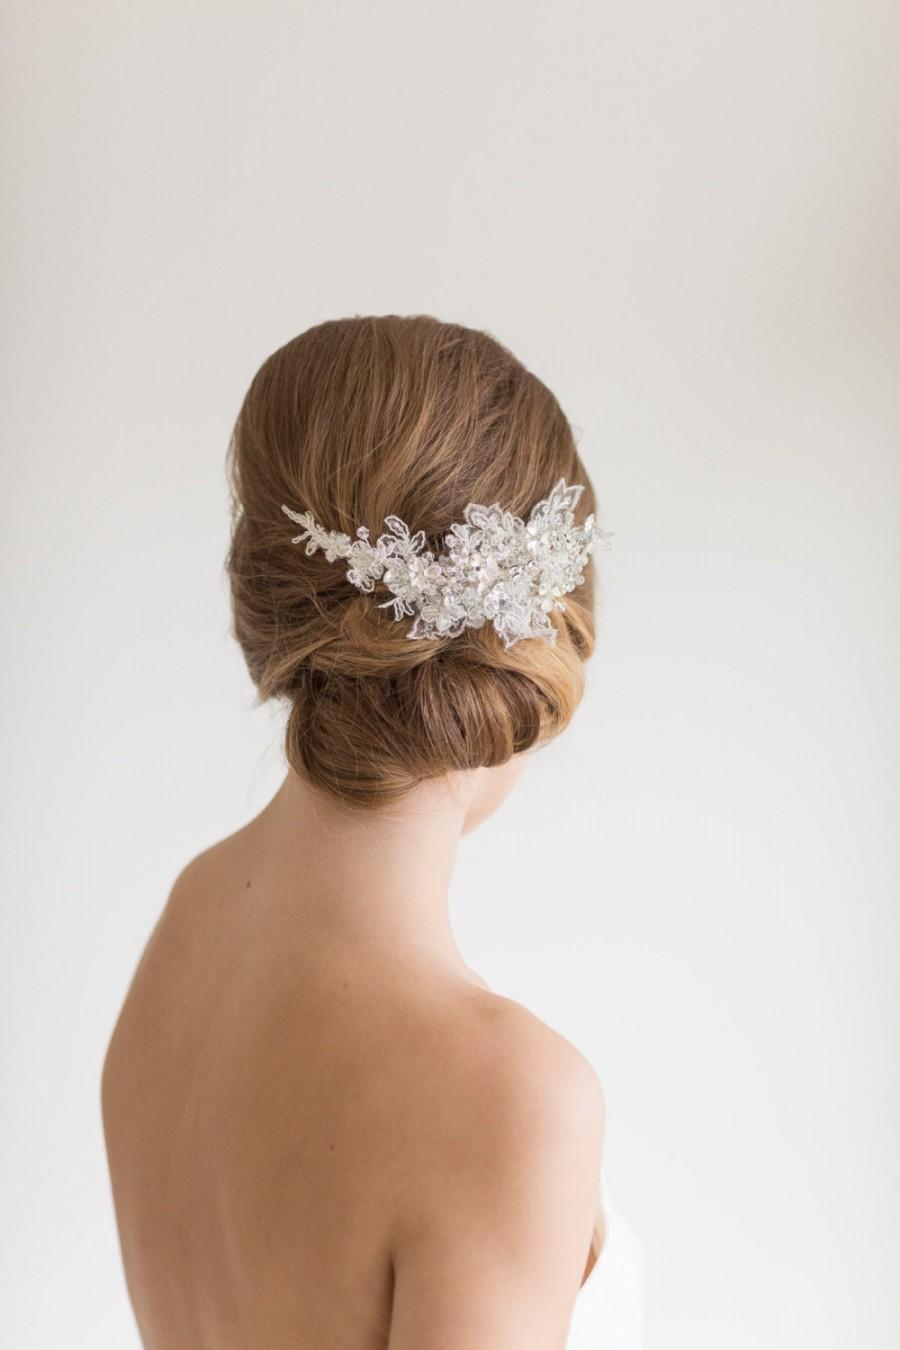 Mariage - Lace Bridal Headpiece,  Crystal and lace Hair Comb, Wedding Hair Accessory